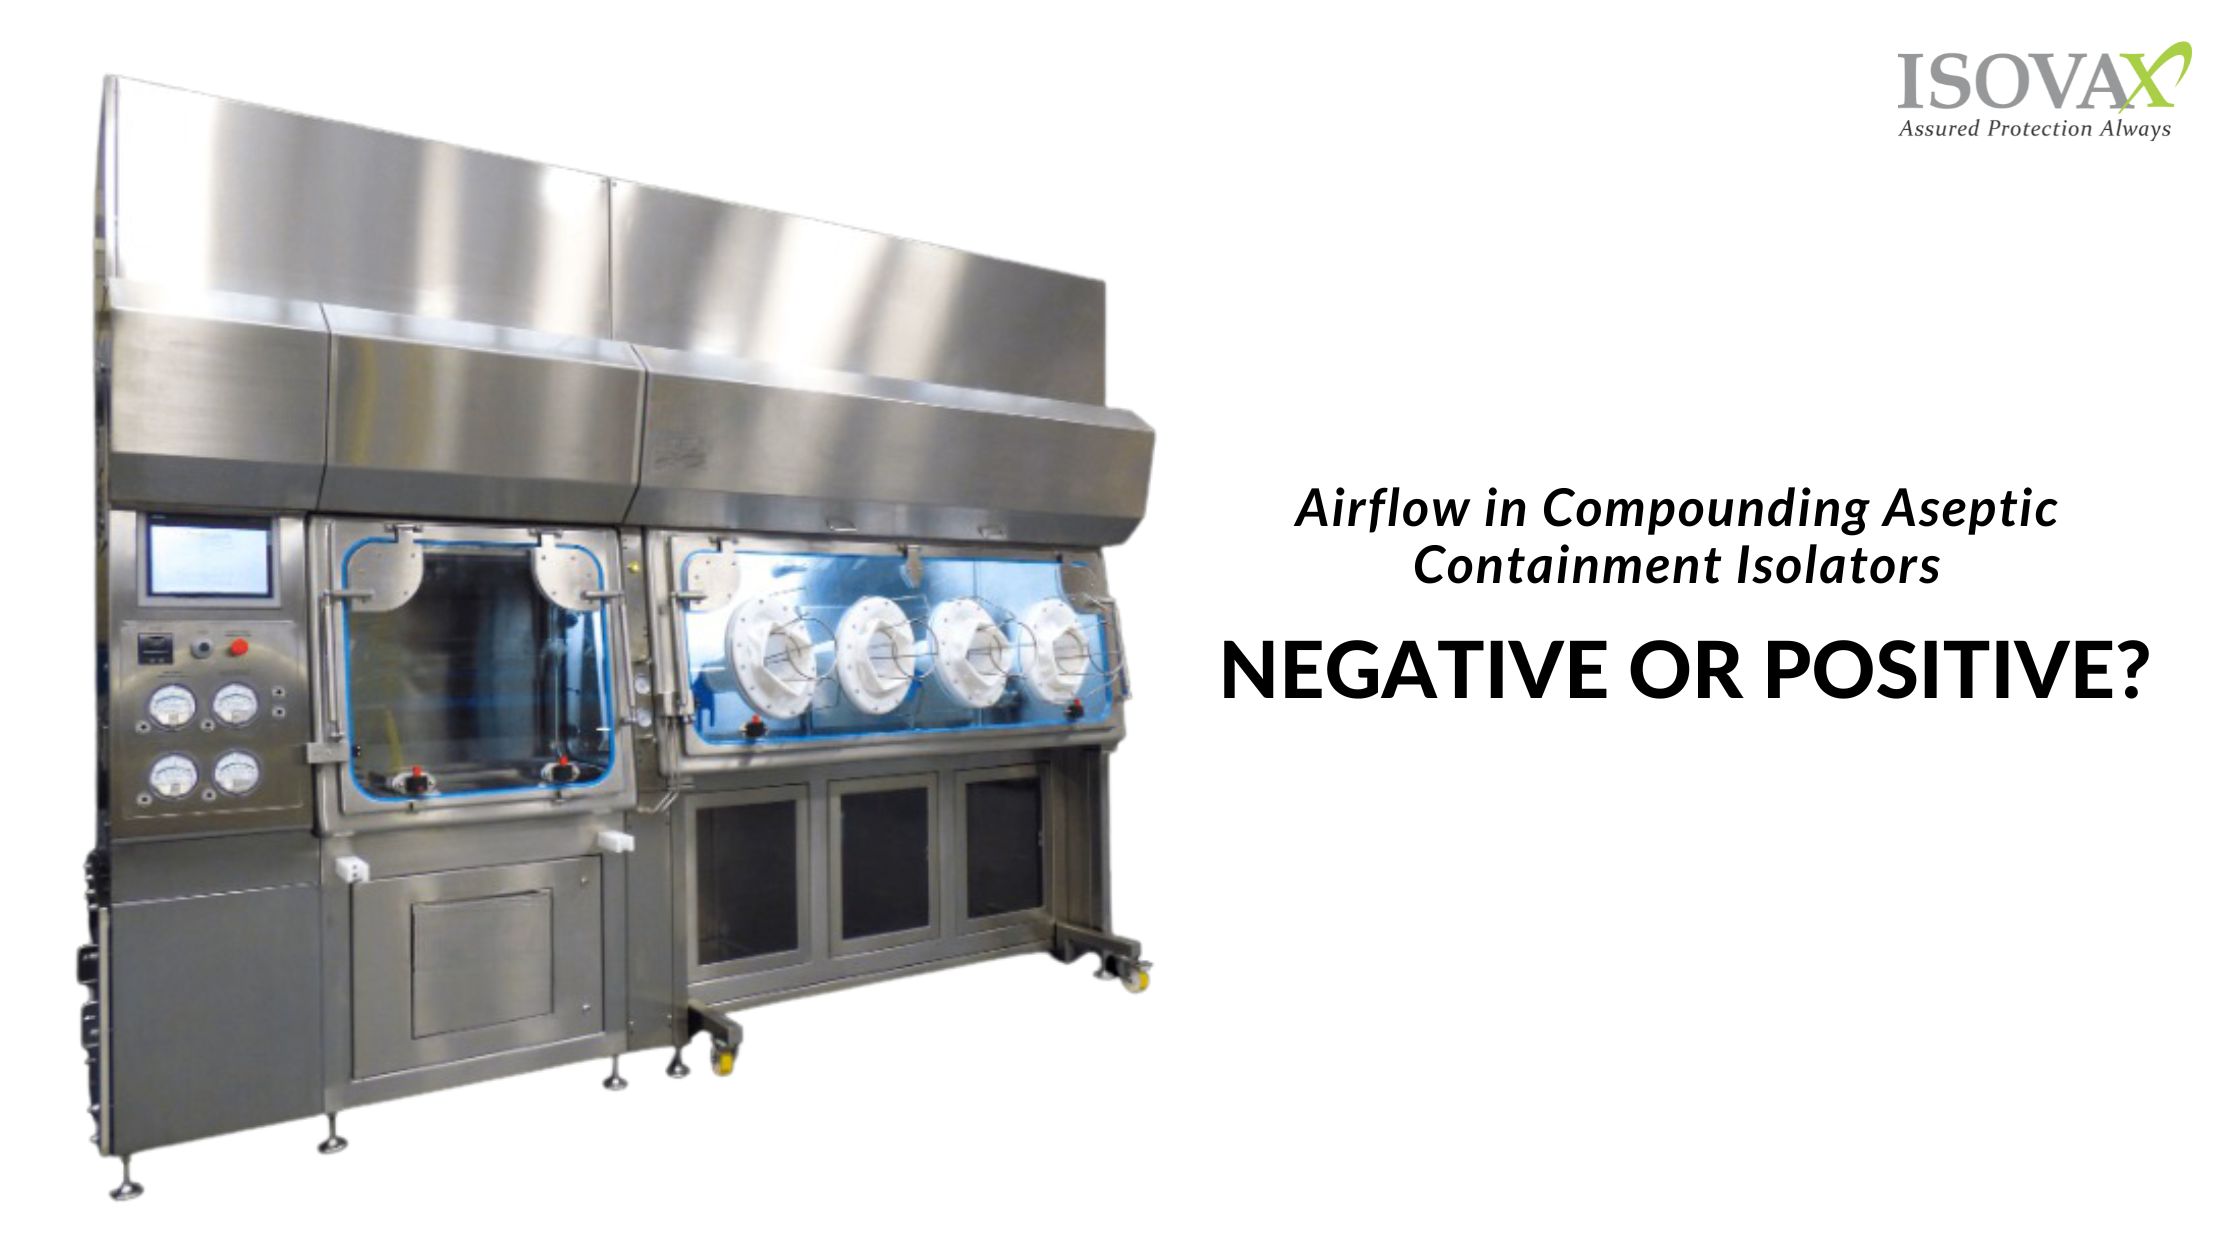 Air flow in Compounding Aseptic Containment Isolators Negative or Positive